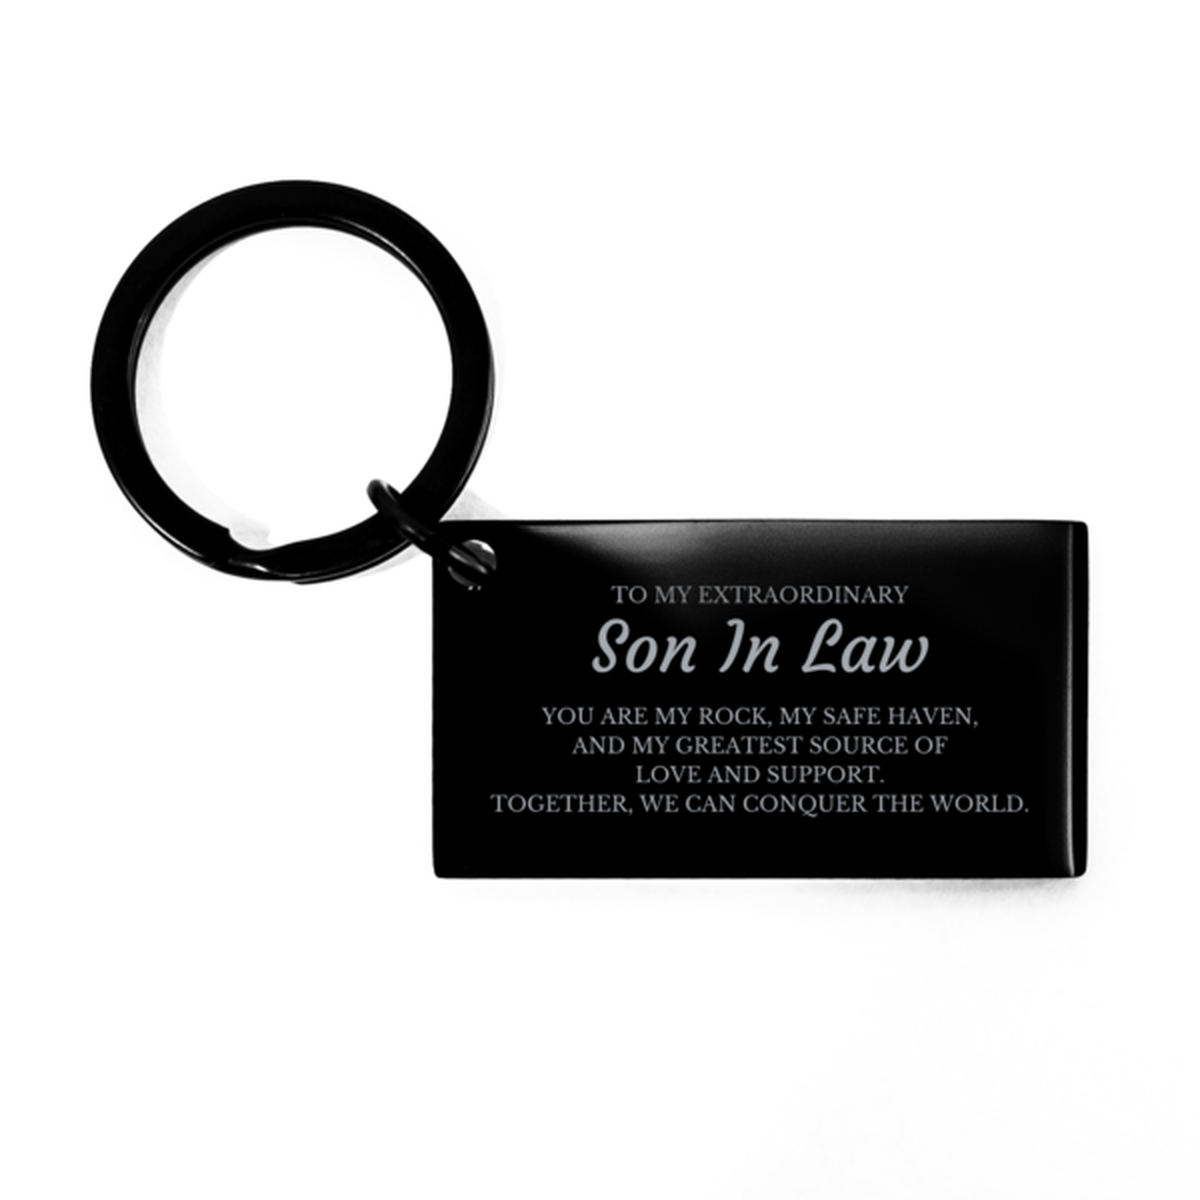 To My Extraordinary Son In Law Gifts, Together, we can conquer the world, Birthday Keychain For Son In Law, Christmas Gifts For Son In Law